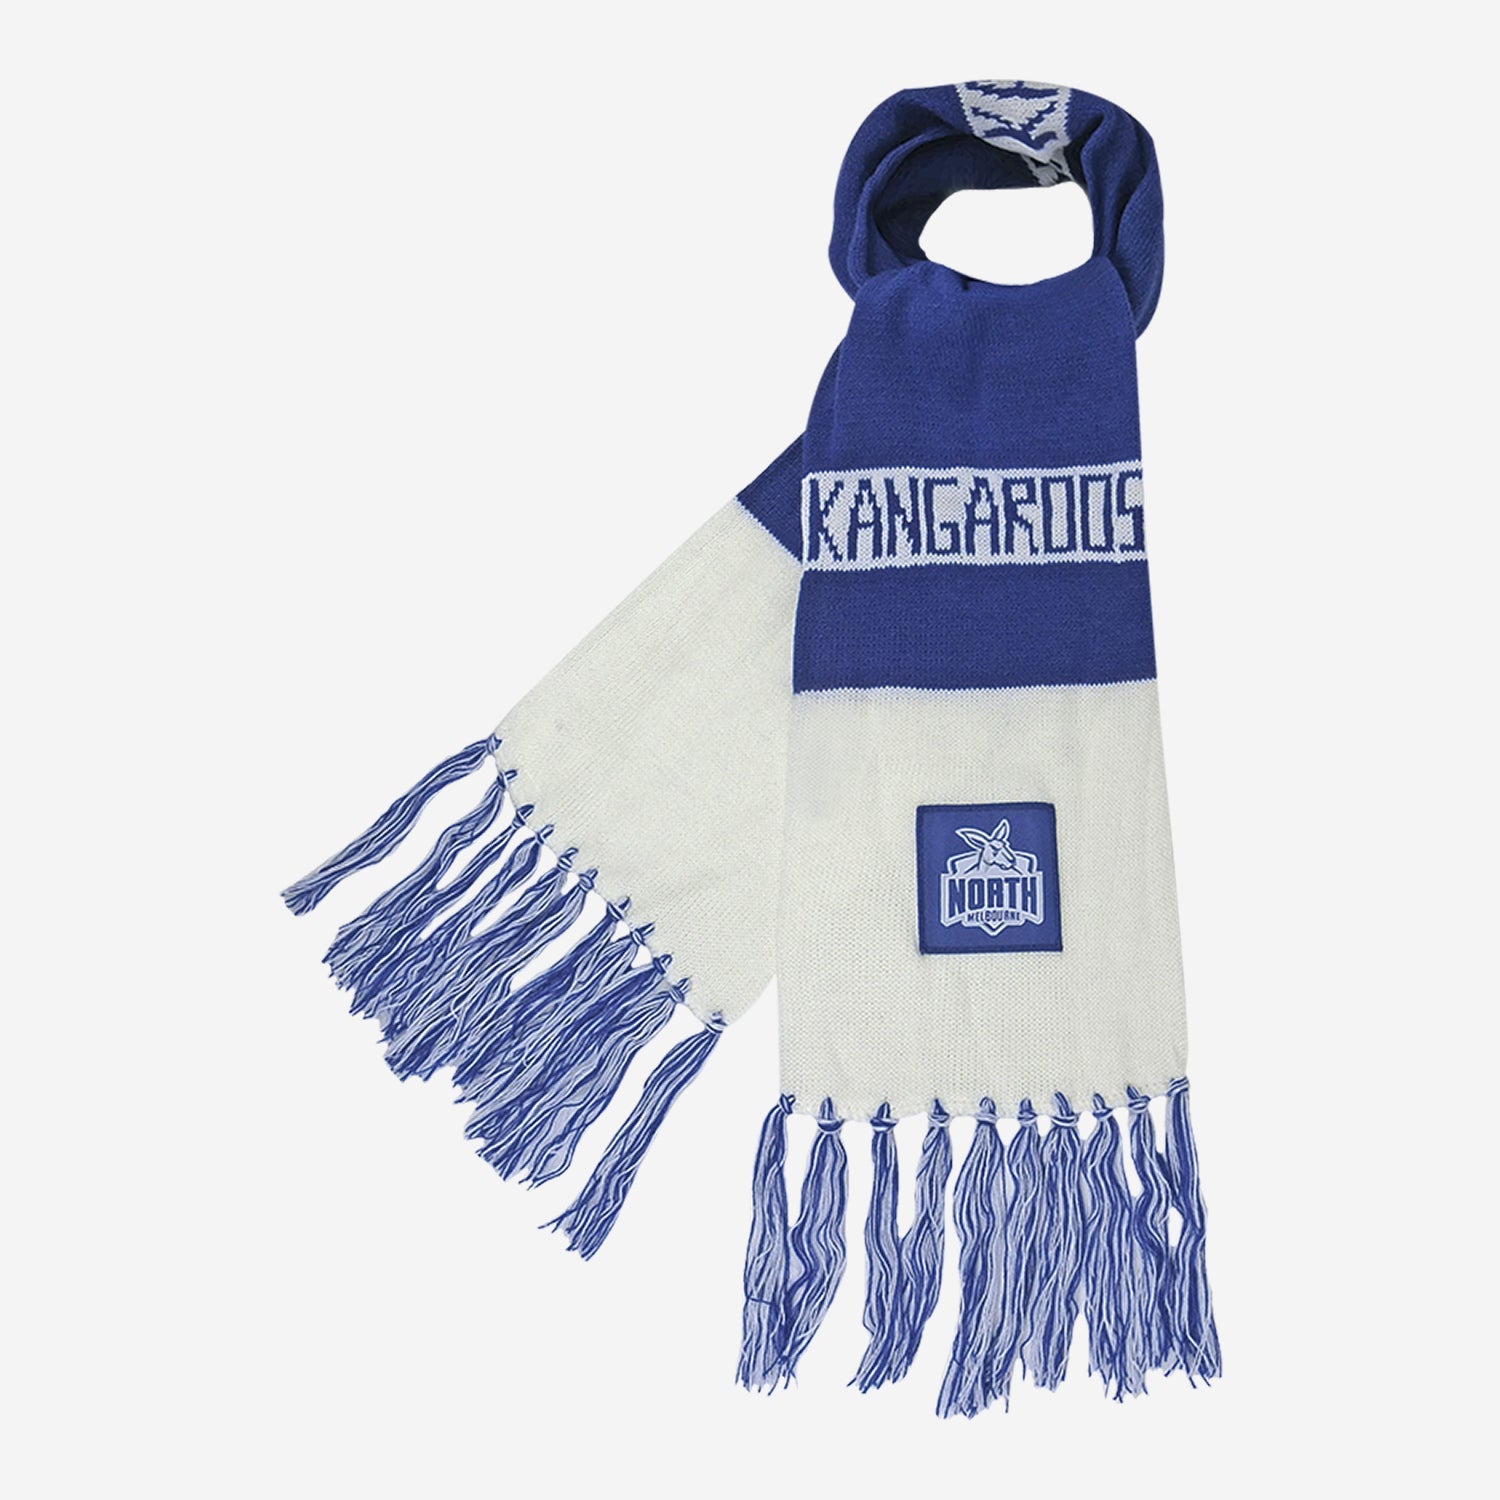 North Melbourne Kangaroos - Scarf - The Cricket Warehouse